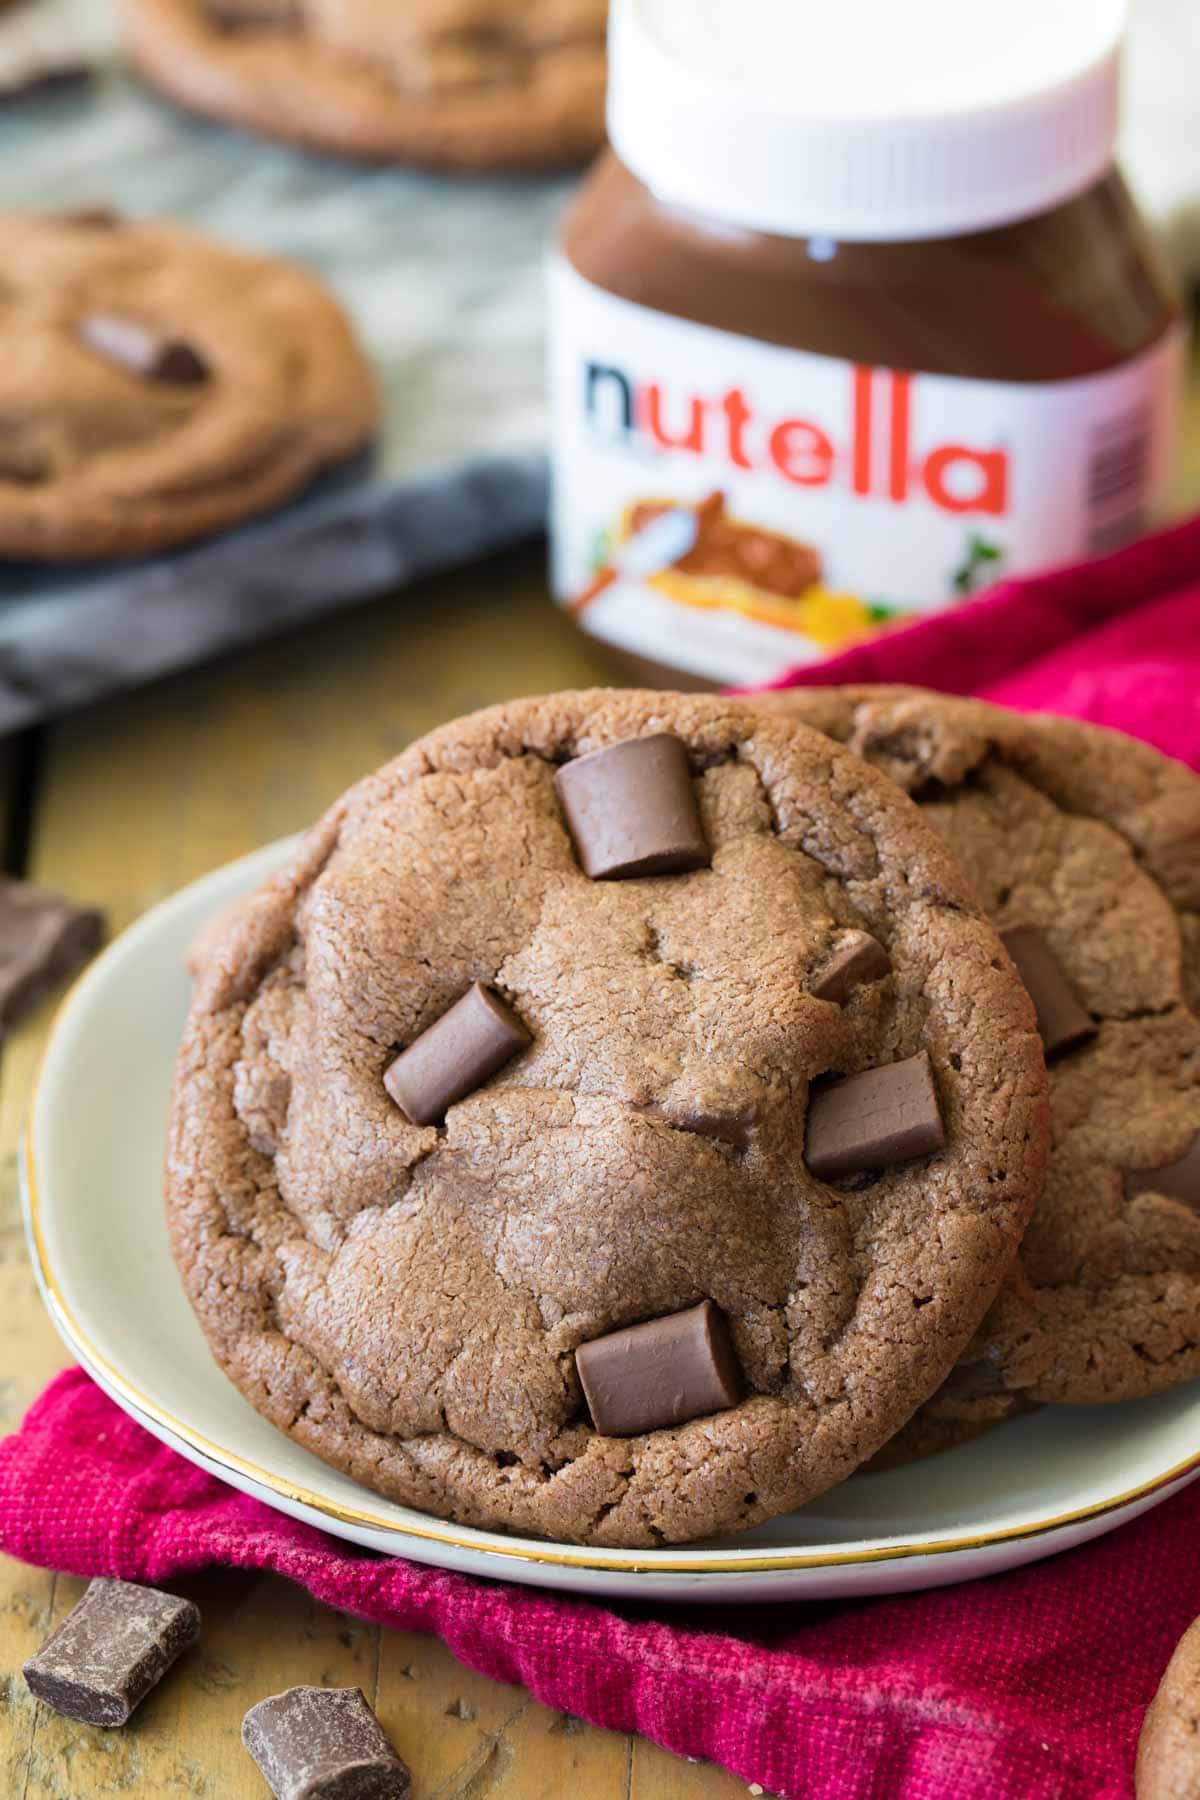 Nutella cookies on a plate with a jar of nutella in the background.